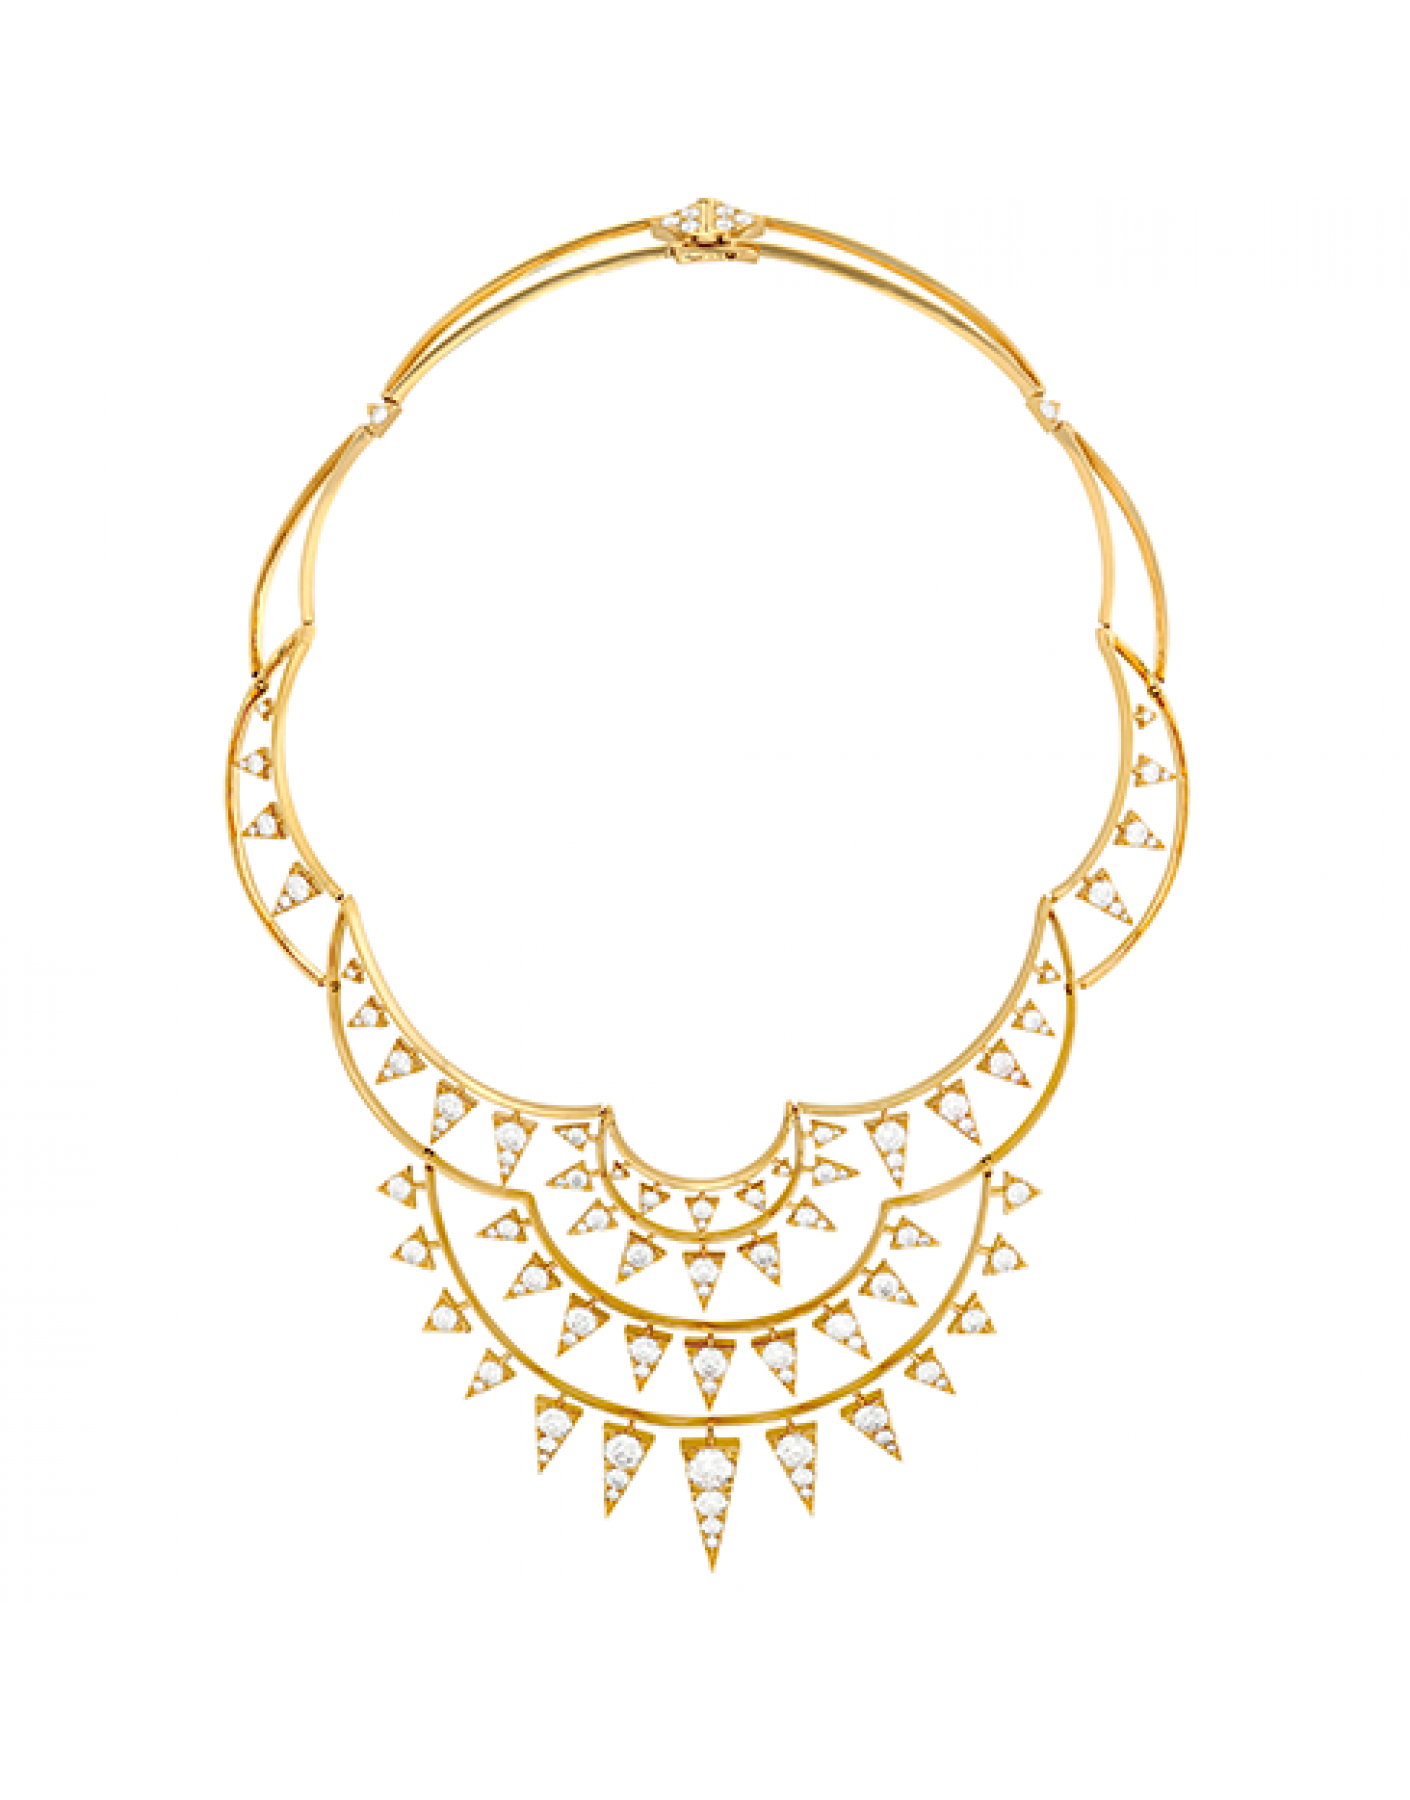 Triplicity Golden Necklace - Necklaces - Jewelry